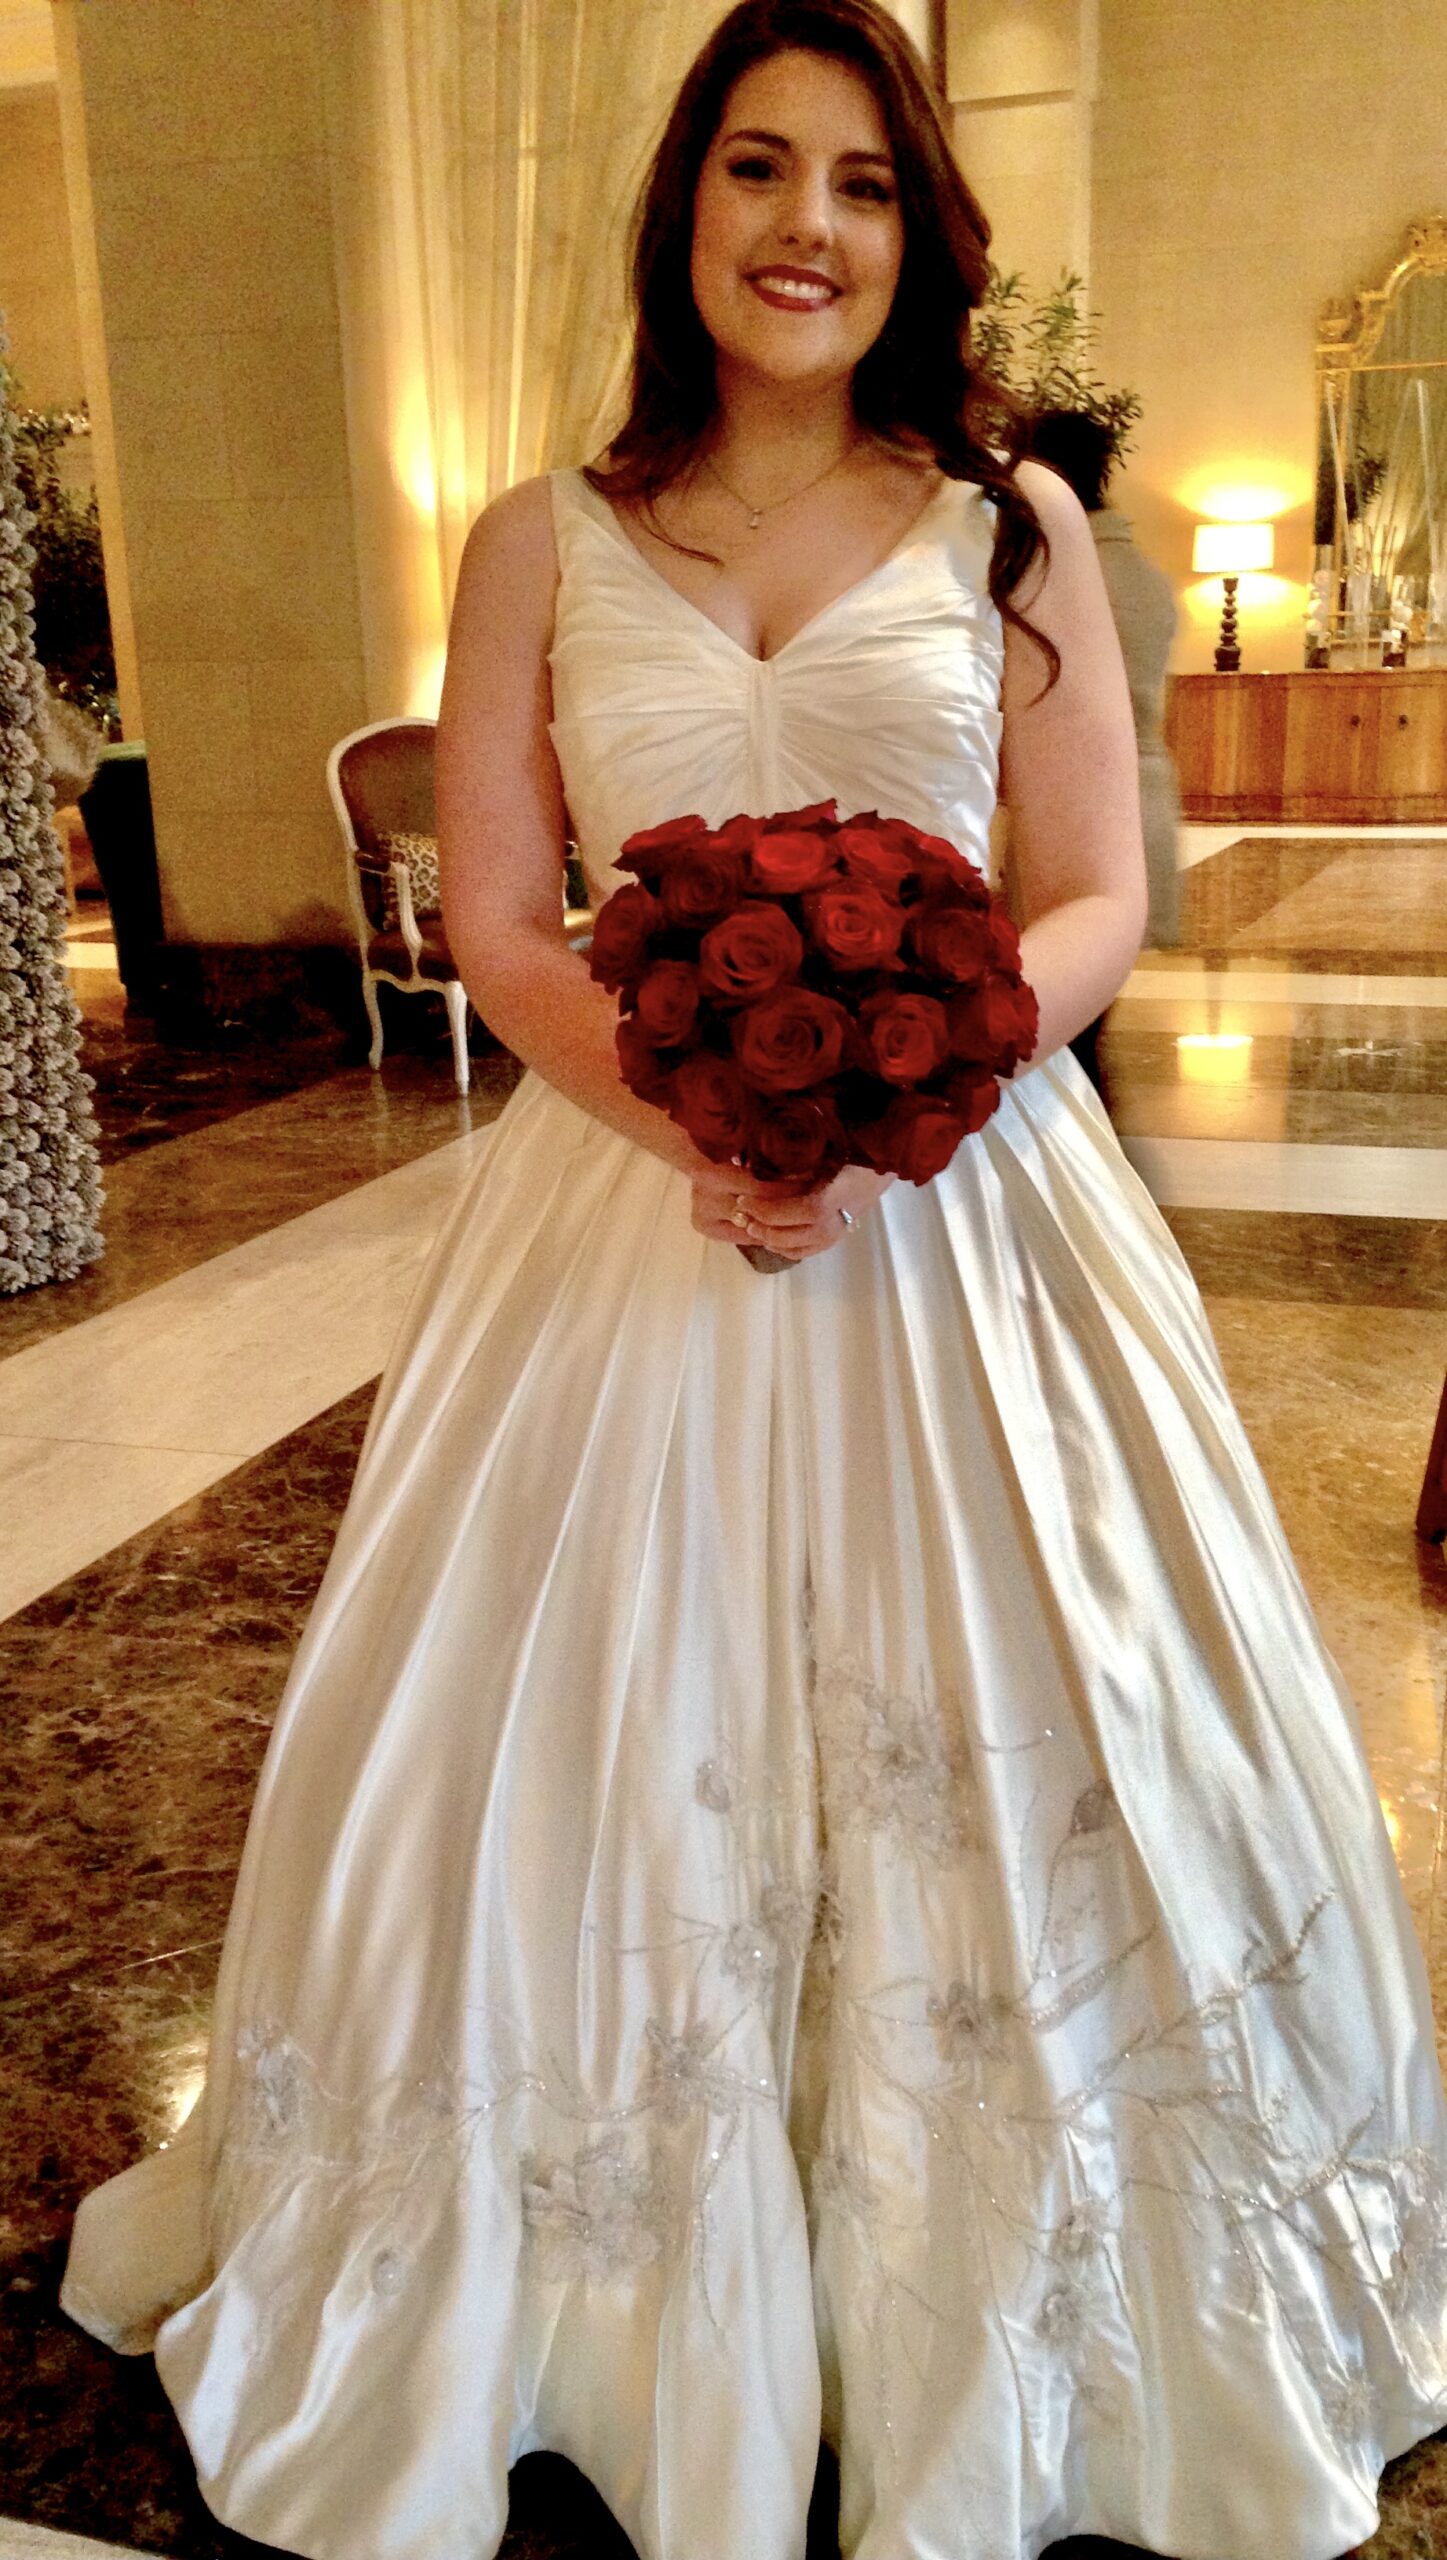 A bride holding her bouquet of roses in the lobby.